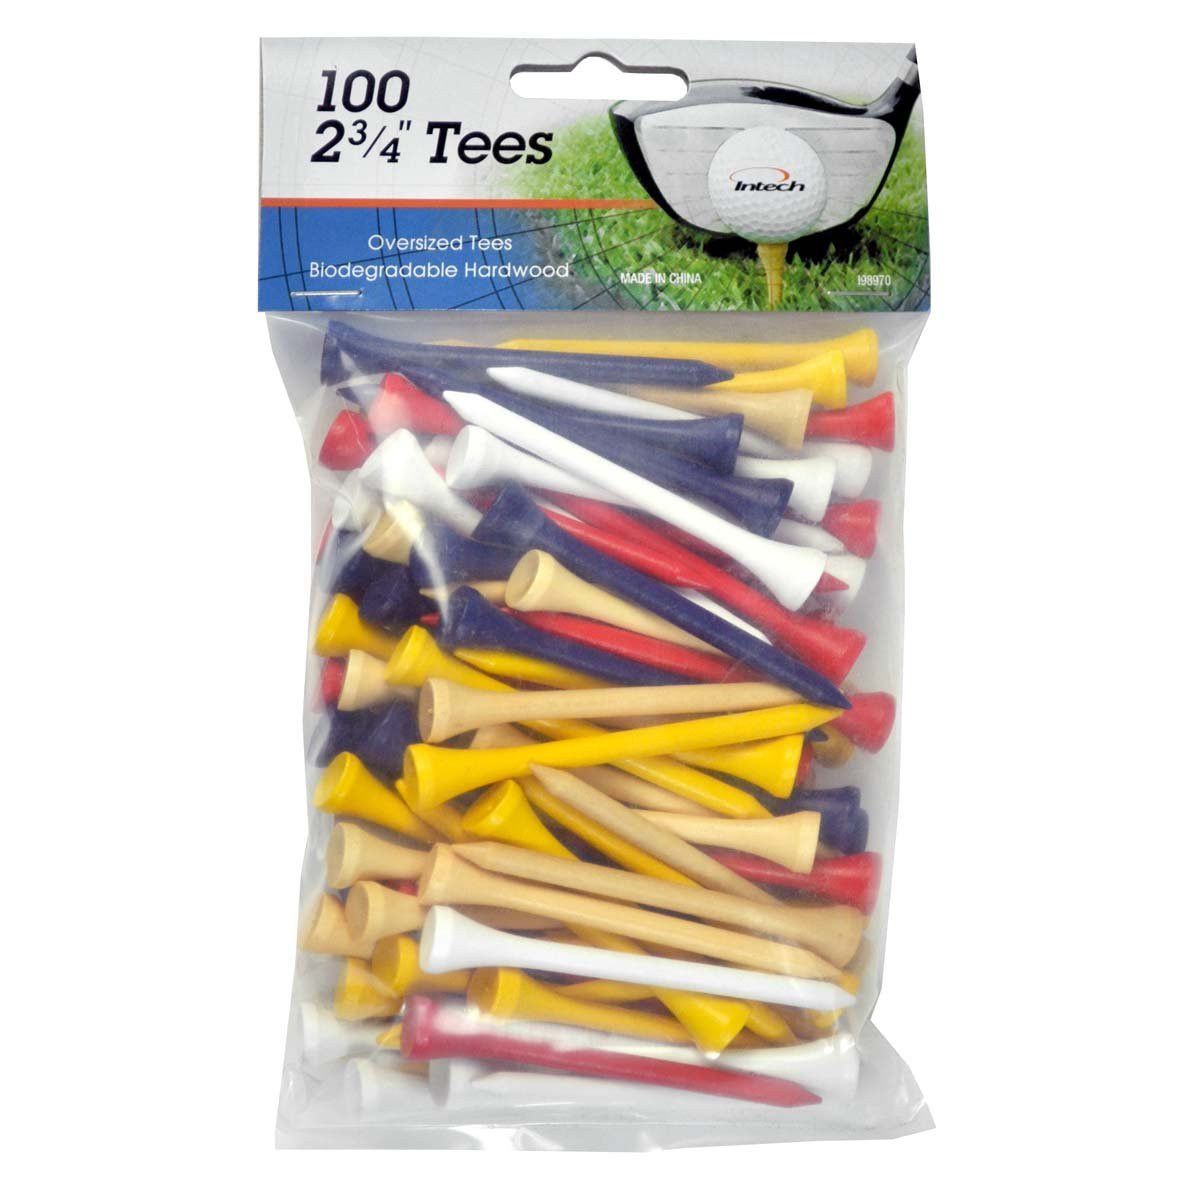 pack of 100 multi-color Intech 2 3/4-Inch Golf Tees